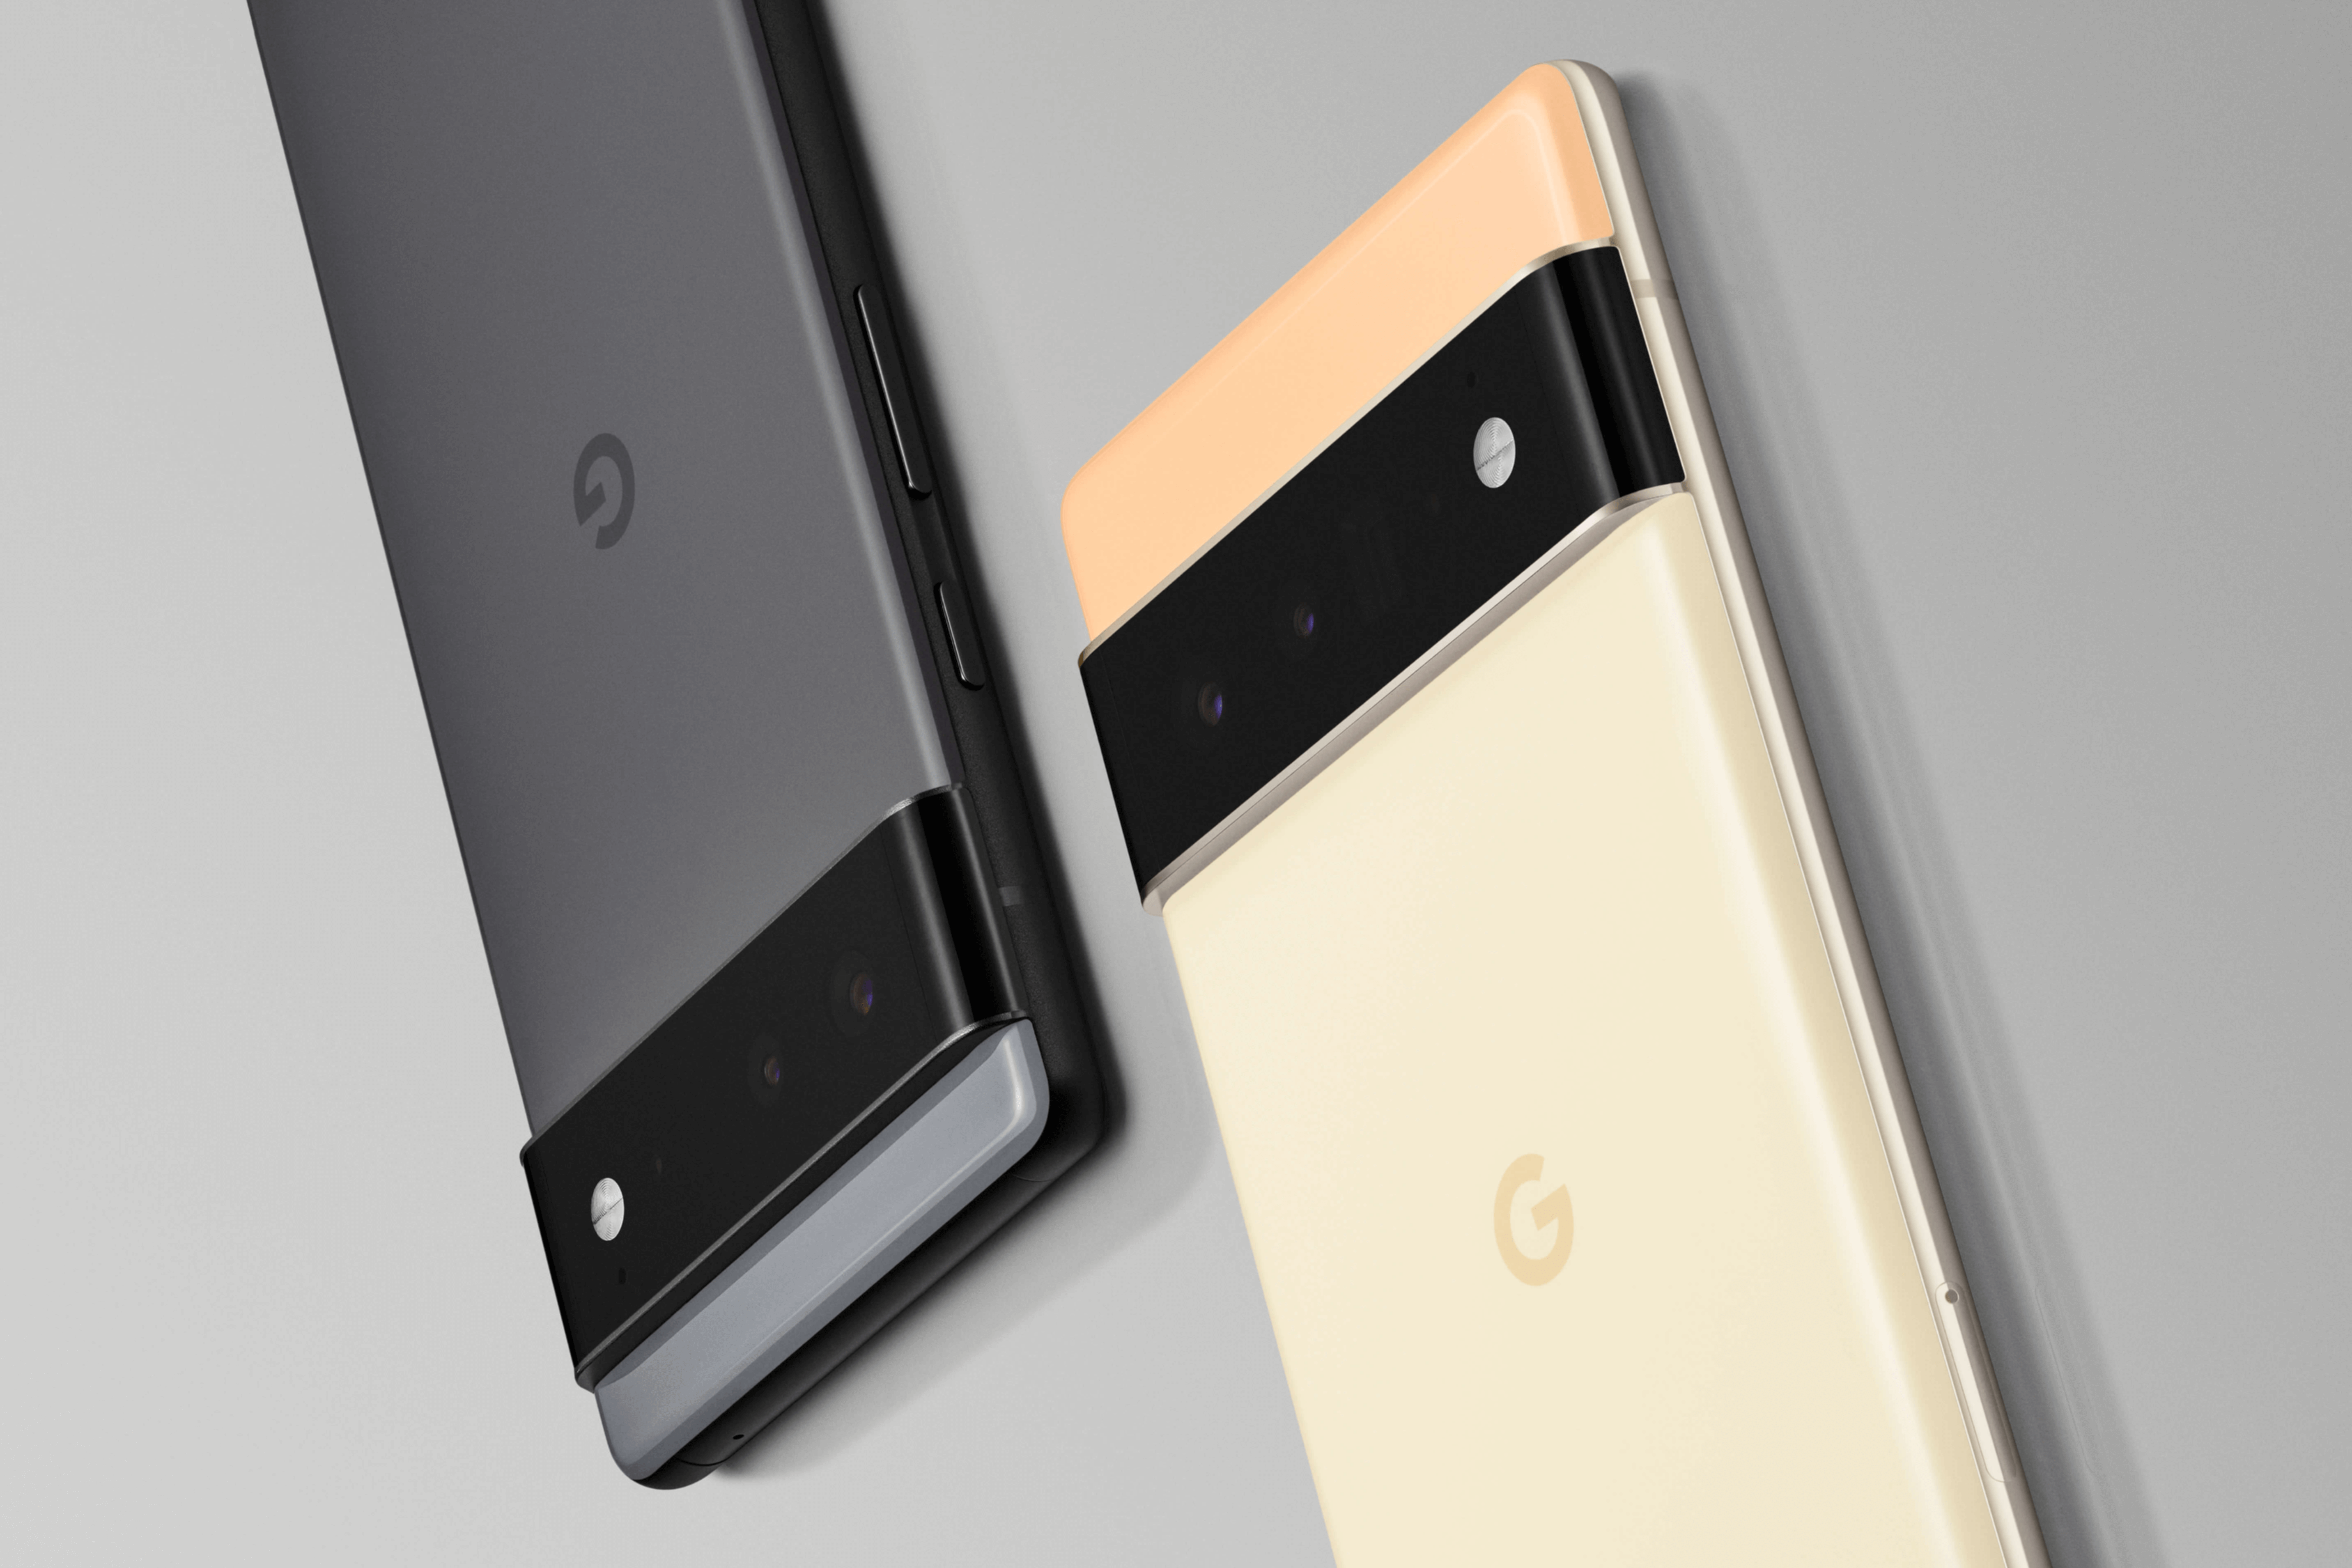 Google prepares for strongest Pixel sales ever with Pixel 6 launch